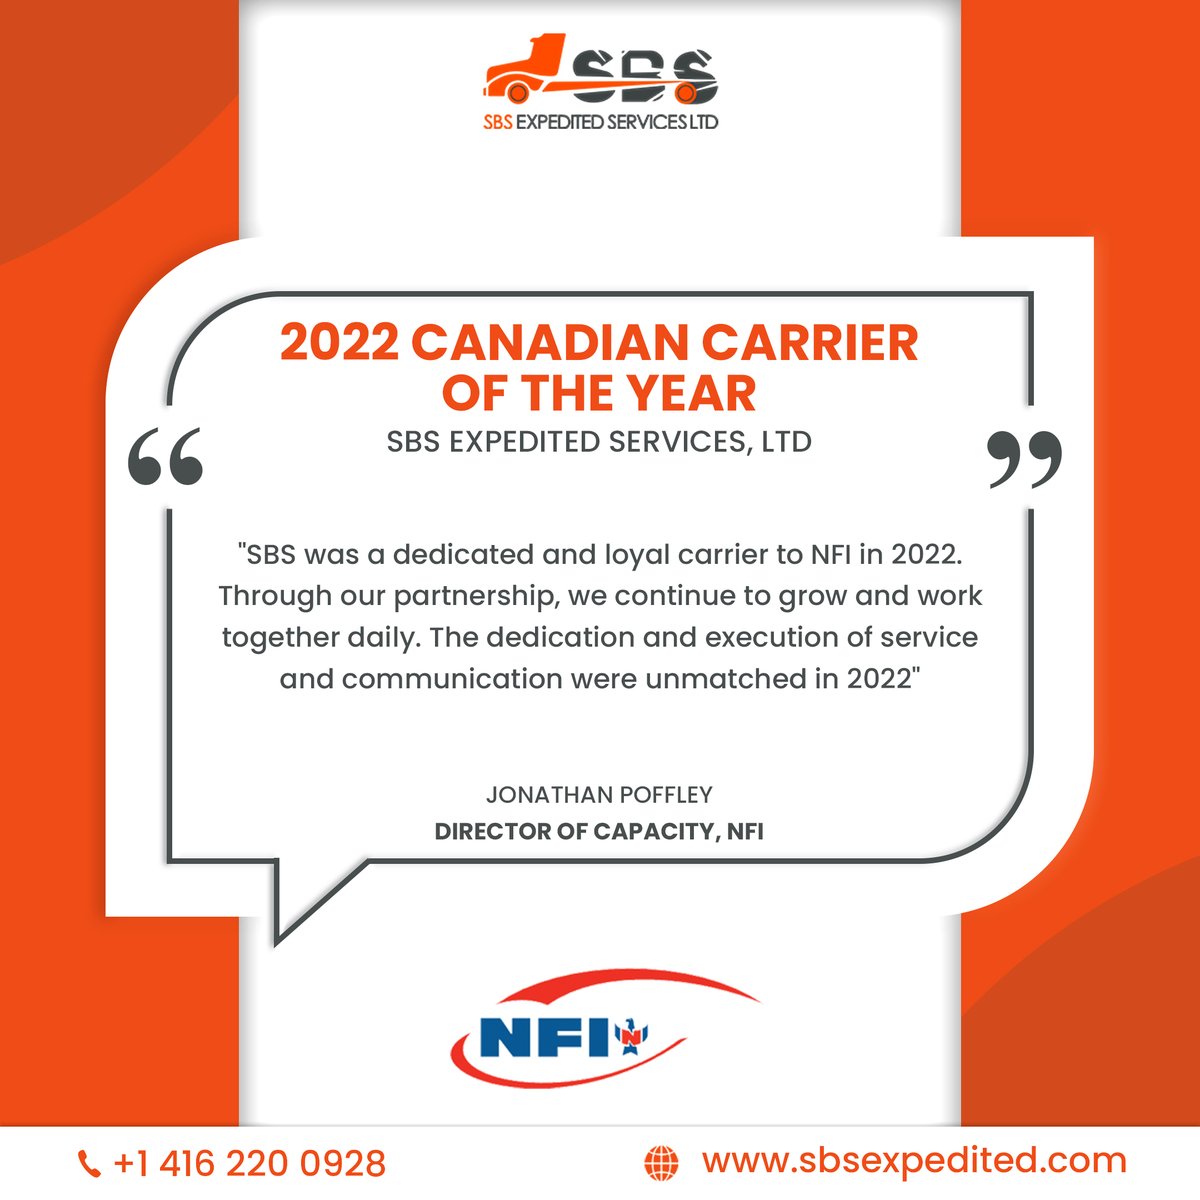 SBS Expedited is recognized as the 2022 Canadian Carrier of The Year by NFI for being a dedicated and loyal carrier.
.
.
.
#sbs #sbsexpedited #canadian #carrier #freight #logistics #freightsolution #dedicatedcarrier #recognition #efficient #logisticsservice